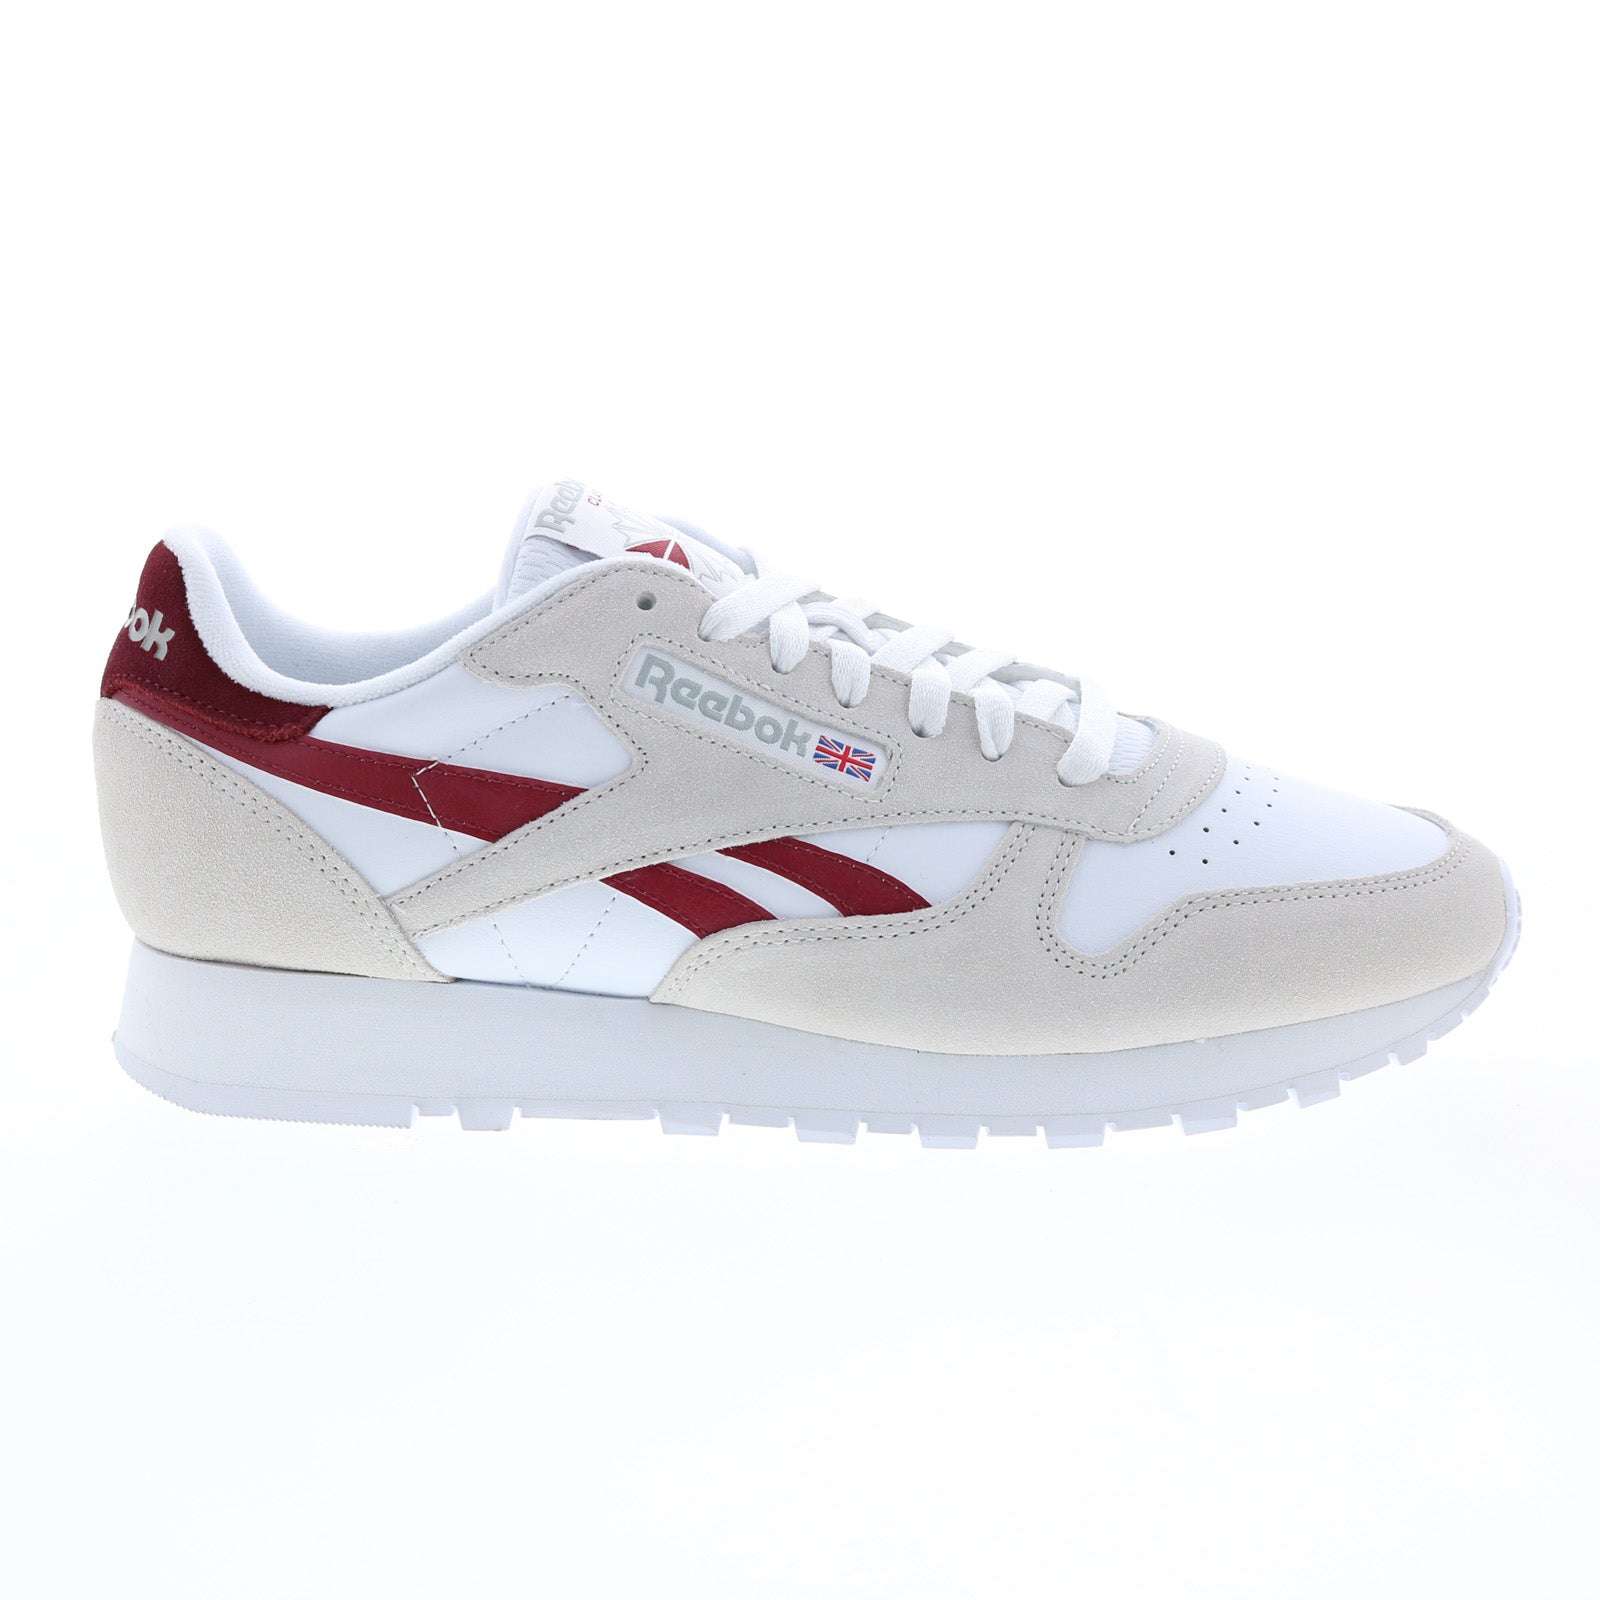 Reebok Classic Leather GY7301 Mens White Suede Lifestyle Sneakers Shoe - Shoes